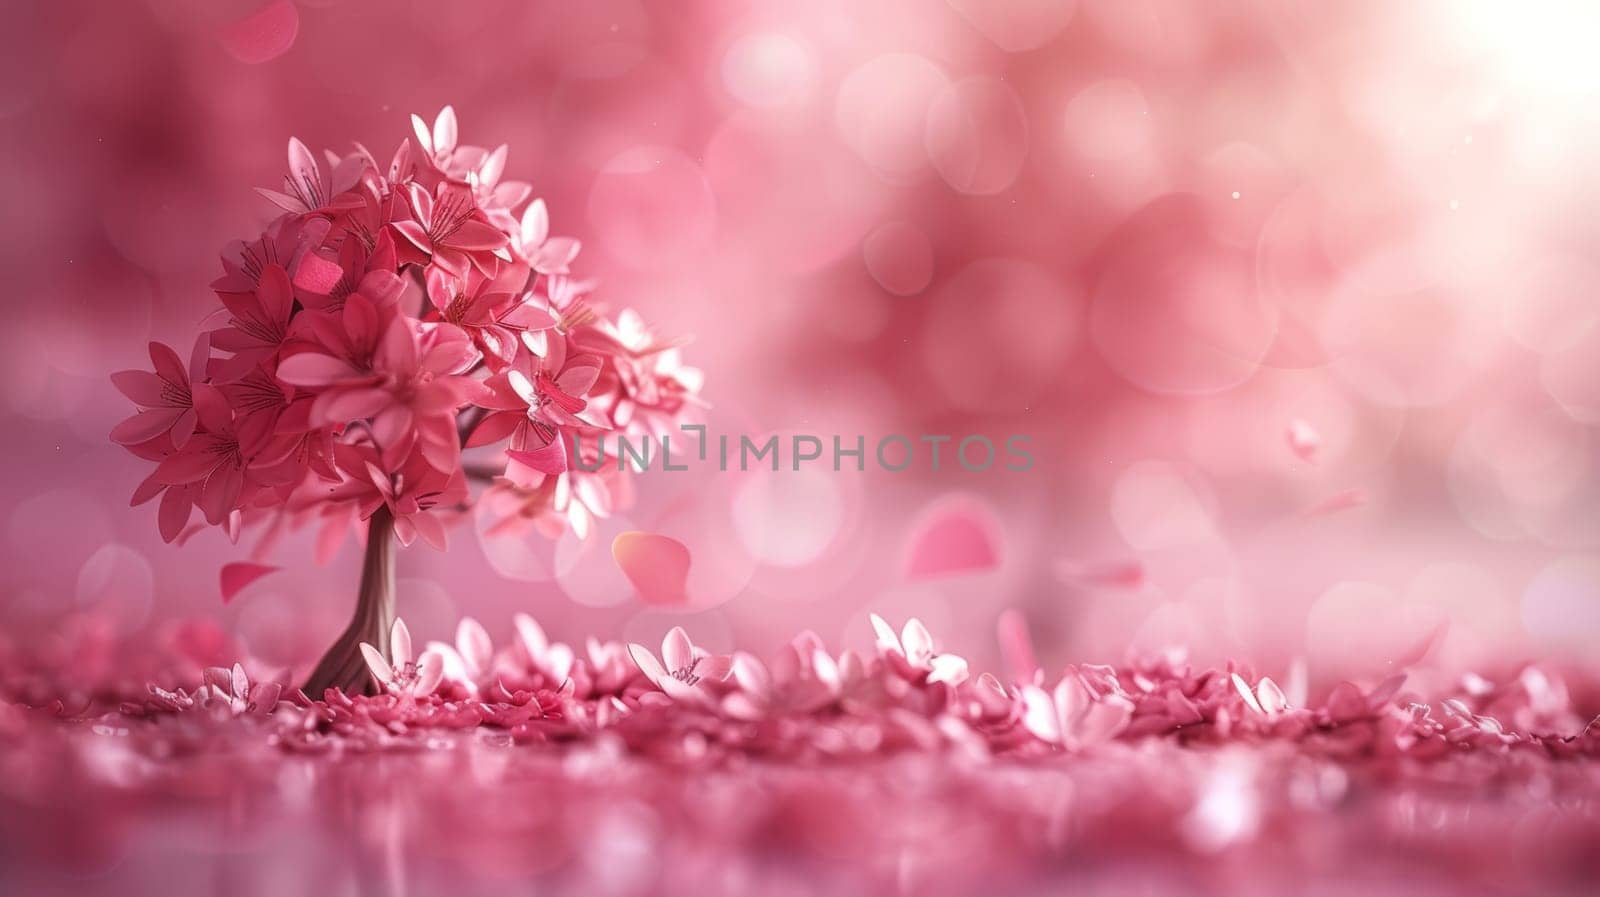 Pink Cherry Blossom Tree in Springtime Sunlight with Falling Petals by ailike